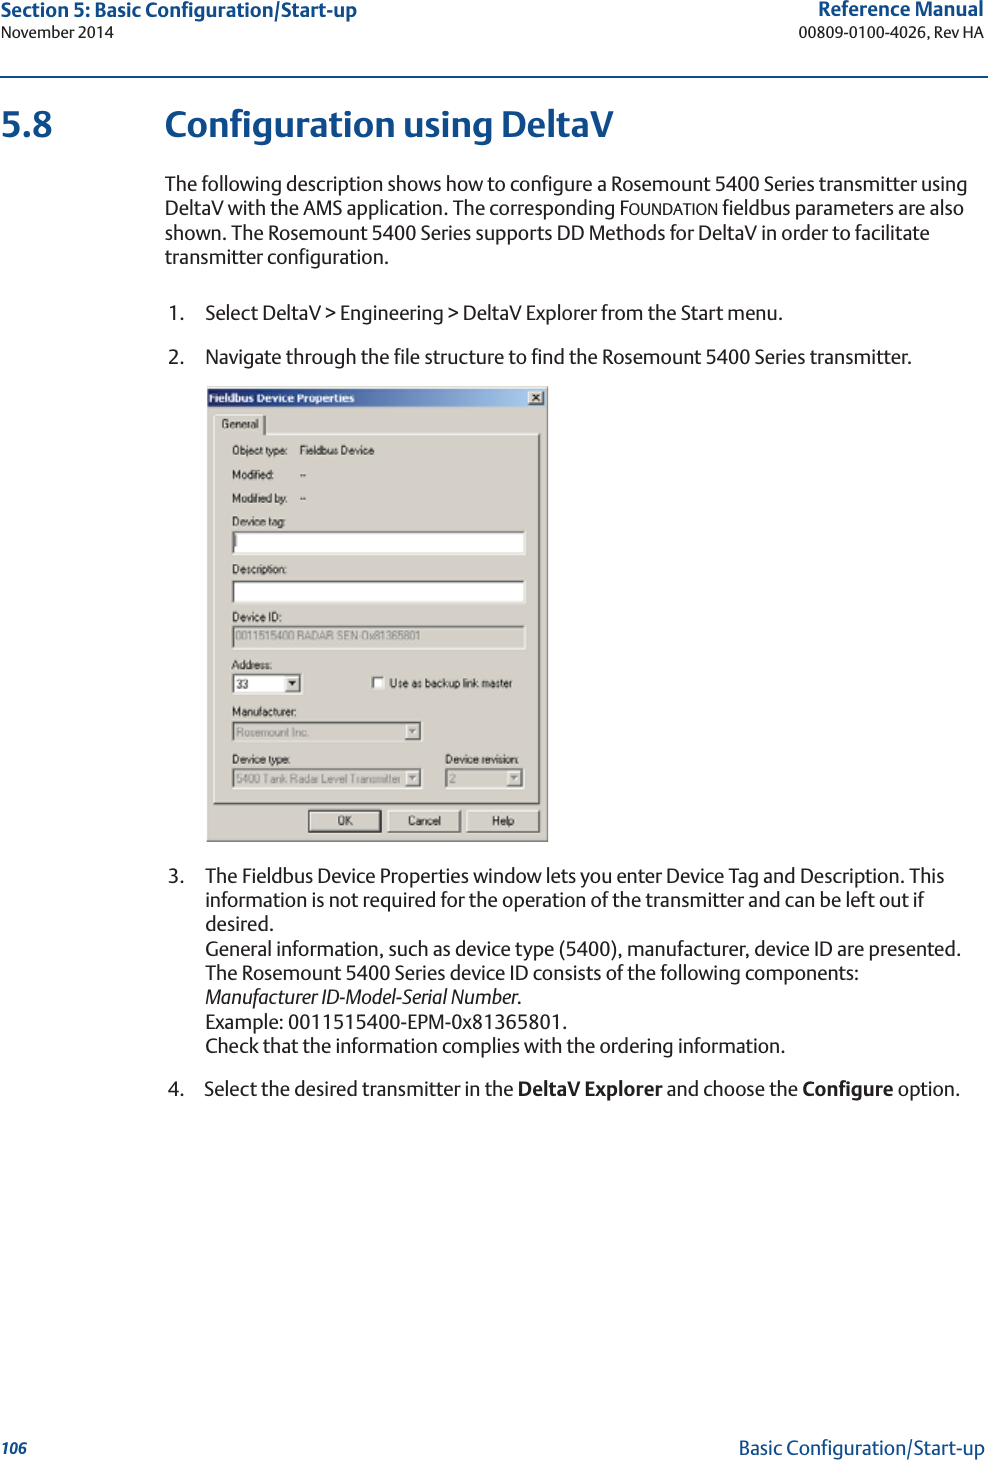 106Reference Manual00809-0100-4026, Rev HASection 5: Basic Configuration/Start-upNovember 2014Basic Configuration/Start-up5.8 Configuration using DeltaVThe following description shows how to configure a Rosemount 5400 Series transmitter using DeltaV with the AMS application. The corresponding FOUNDATION fieldbus parameters are also shown. The Rosemount 5400 Series supports DD Methods for DeltaV in order to facilitate transmitter configuration.1. Select DeltaV &gt; Engineering &gt; DeltaV Explorer from the Start menu.2. Navigate through the file structure to find the Rosemount 5400 Series transmitter.3. The Fieldbus Device Properties window lets you enter Device Tag and Description. This information is not required for the operation of the transmitter and can be left out if desired.General information, such as device type (5400), manufacturer, device ID are presented. The Rosemount 5400 Series device ID consists of the following components:Manufacturer ID-Model-Serial Number. Example: 0011515400-EPM-0x81365801.Check that the information complies with the ordering information.4. Select the desired transmitter in the DeltaV Explorer and choose the Configure option.